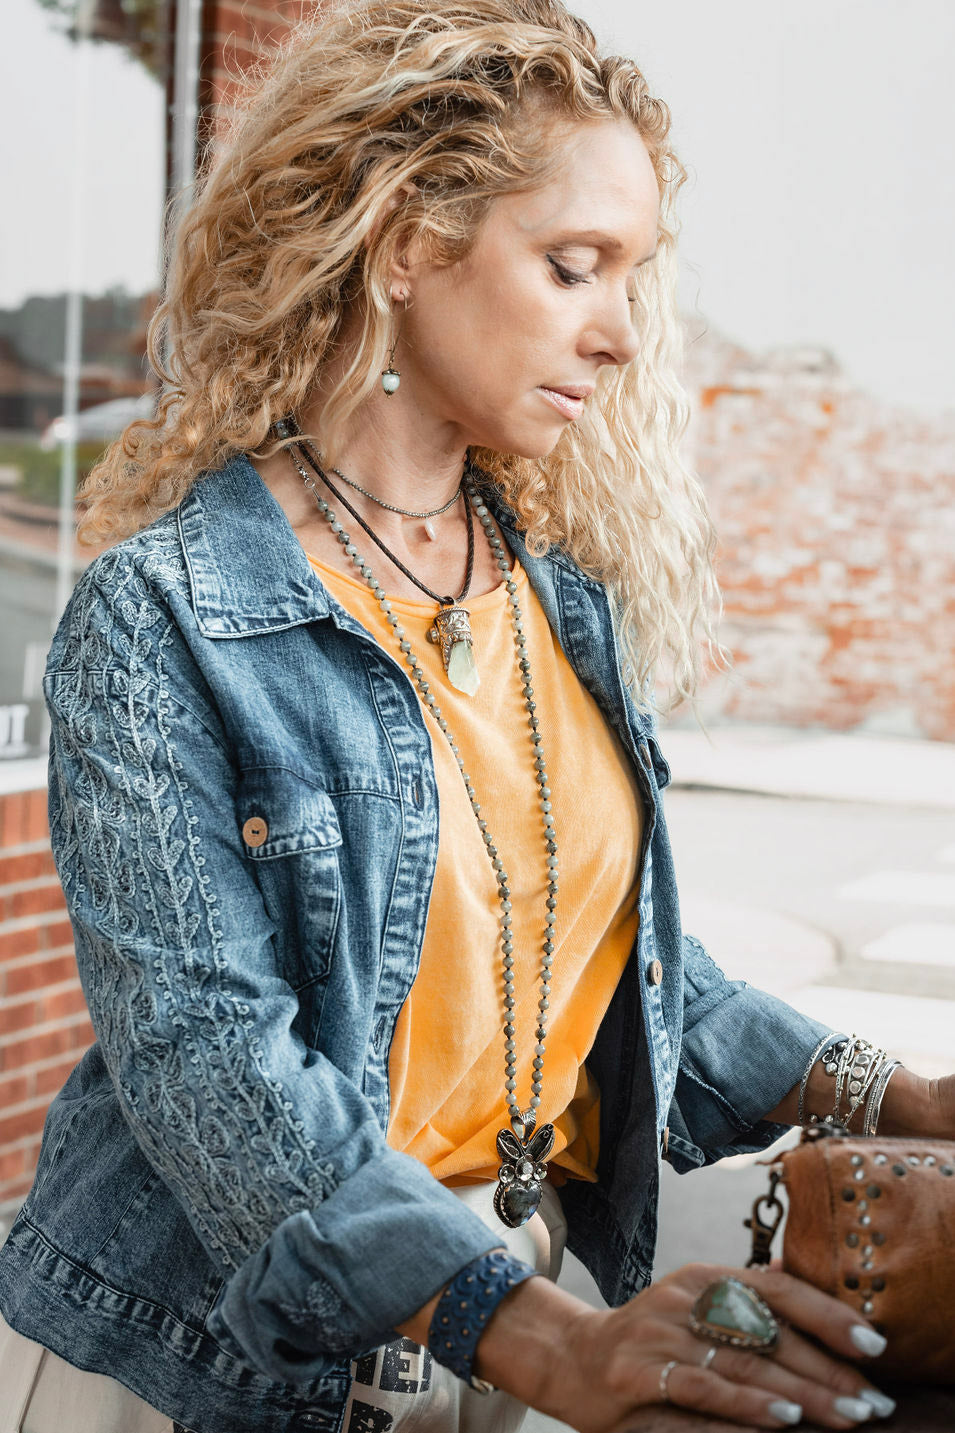 Load image into Gallery viewer, The Clover Denim Jacket in Blue - SpiritedBoutiques Boho Hippie Boutique Style Jacket, Young Threads
